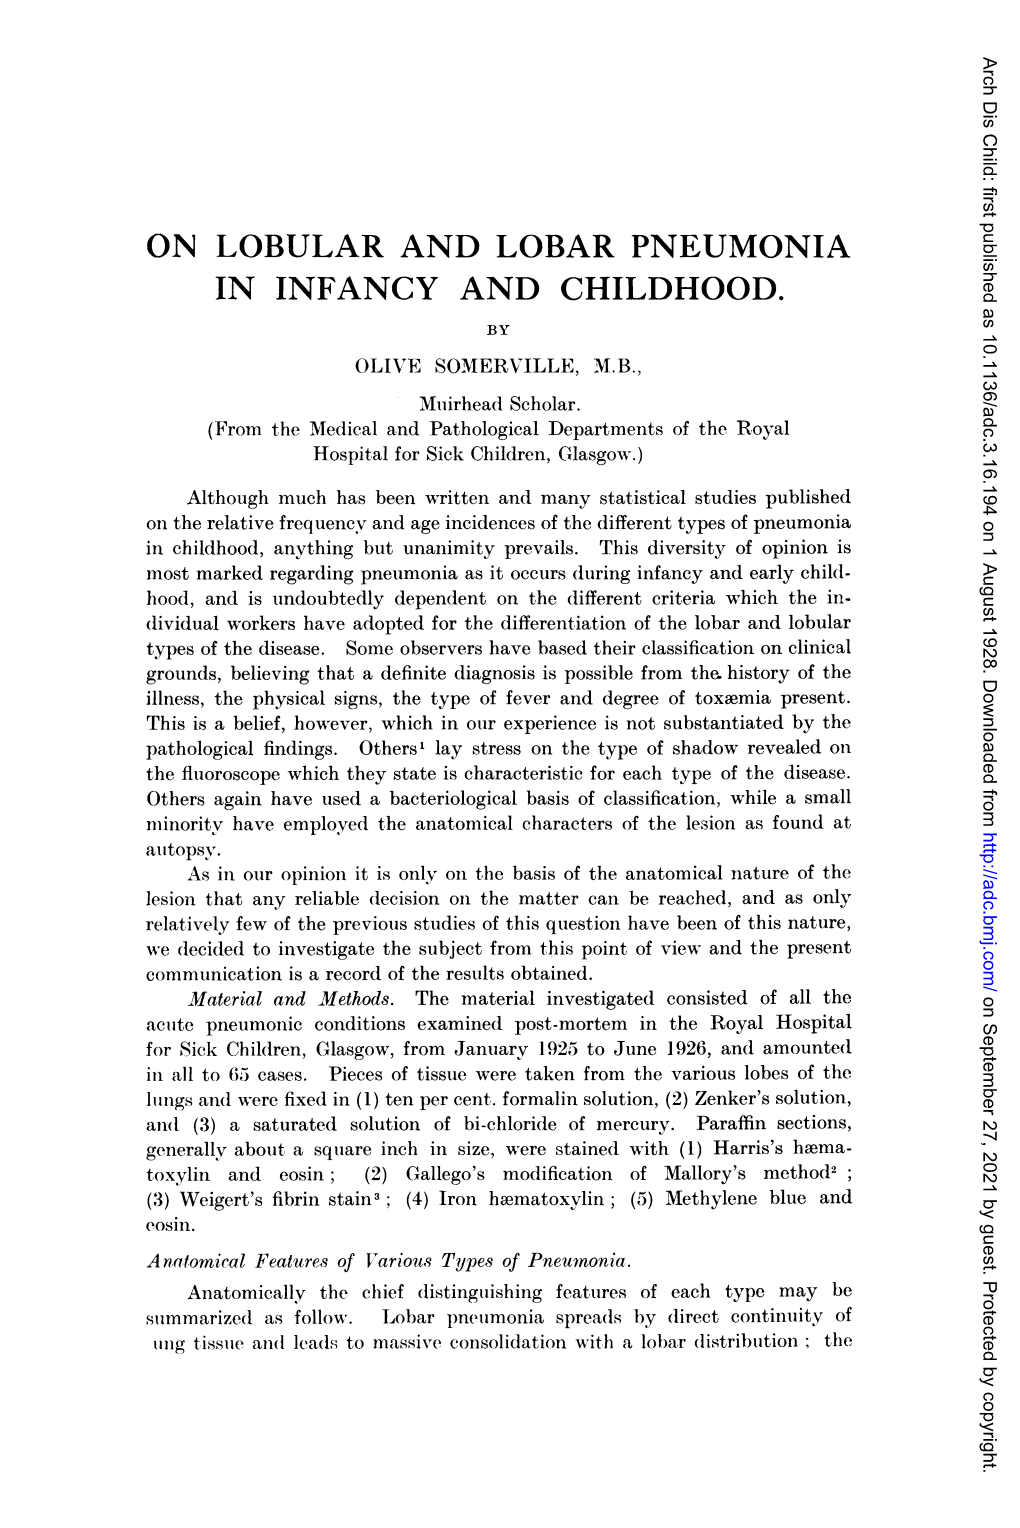 On Lobular and Lobar Pneumonia in Infancy and Childhood